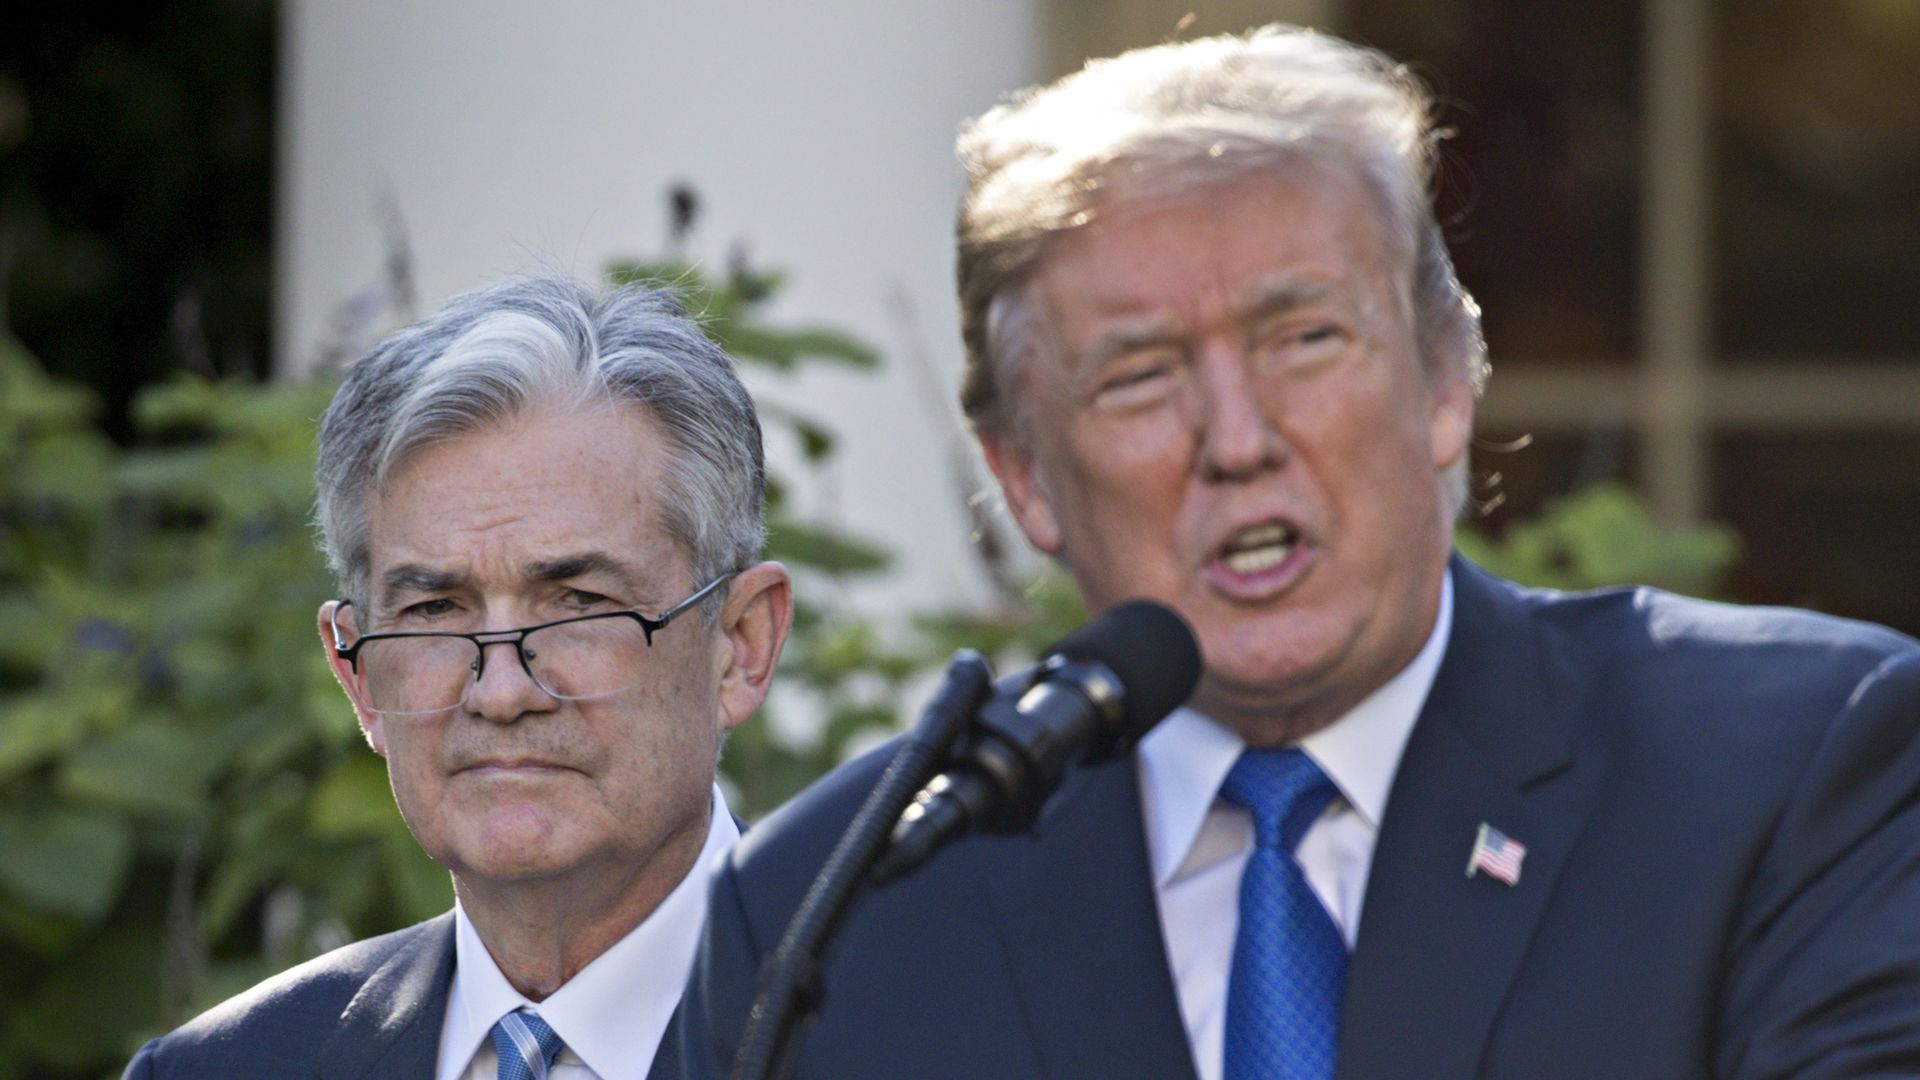 Trump and Federal Reserve Chair Jerome Powell at the White House in November 2017.